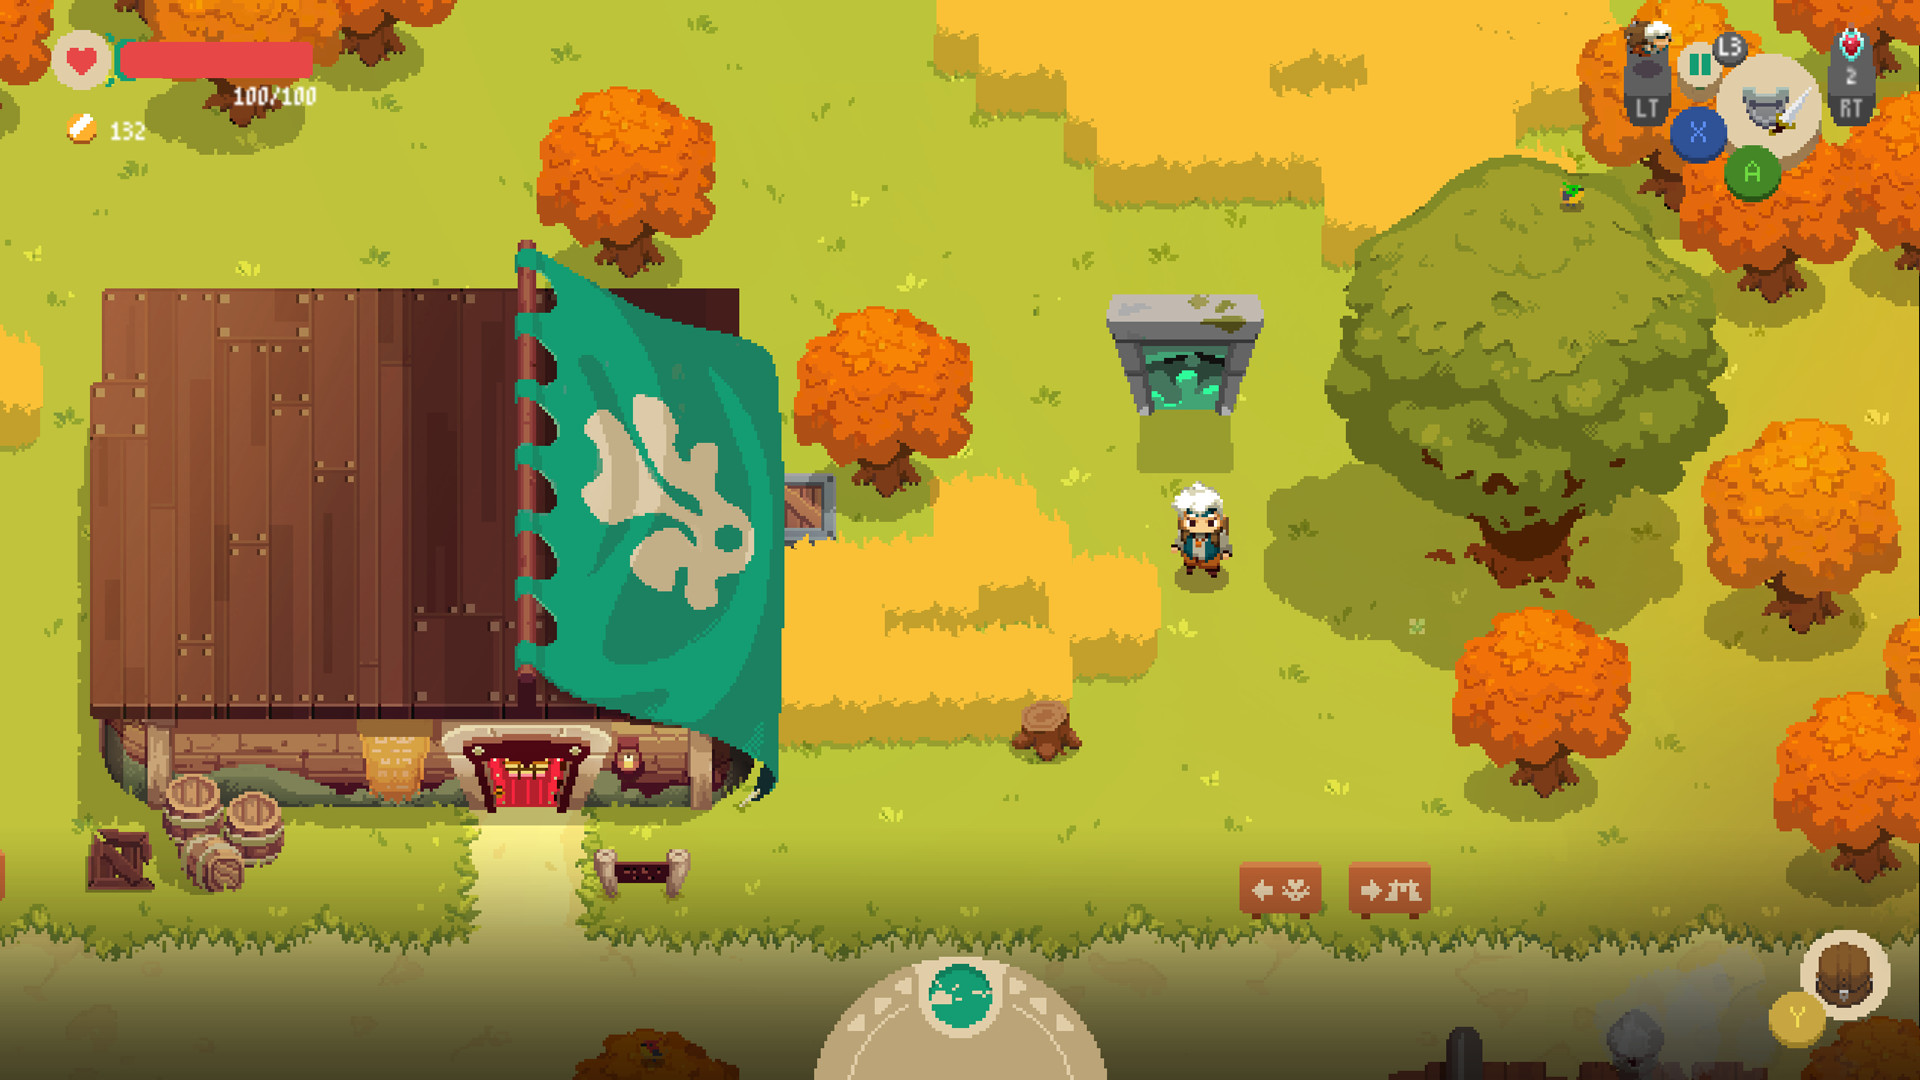 Moonlighter download the new for ios